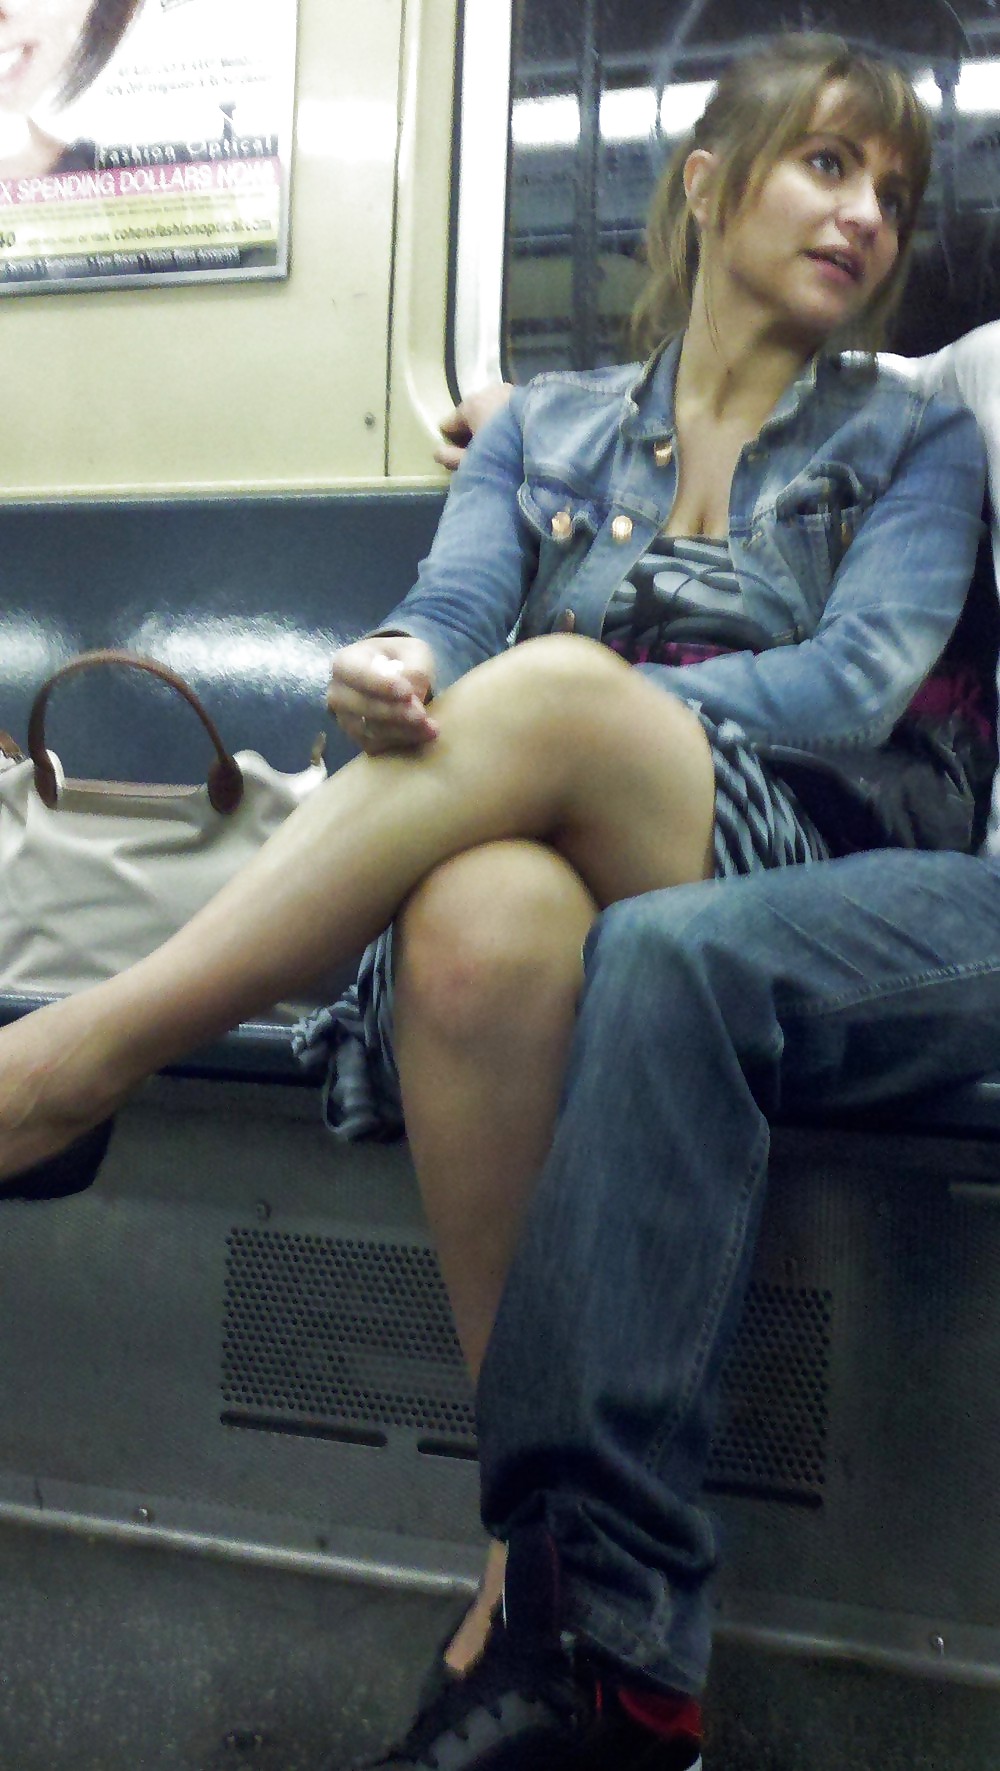 New York Subway Girls Compilation 1 - Legs and Thighs #6590251